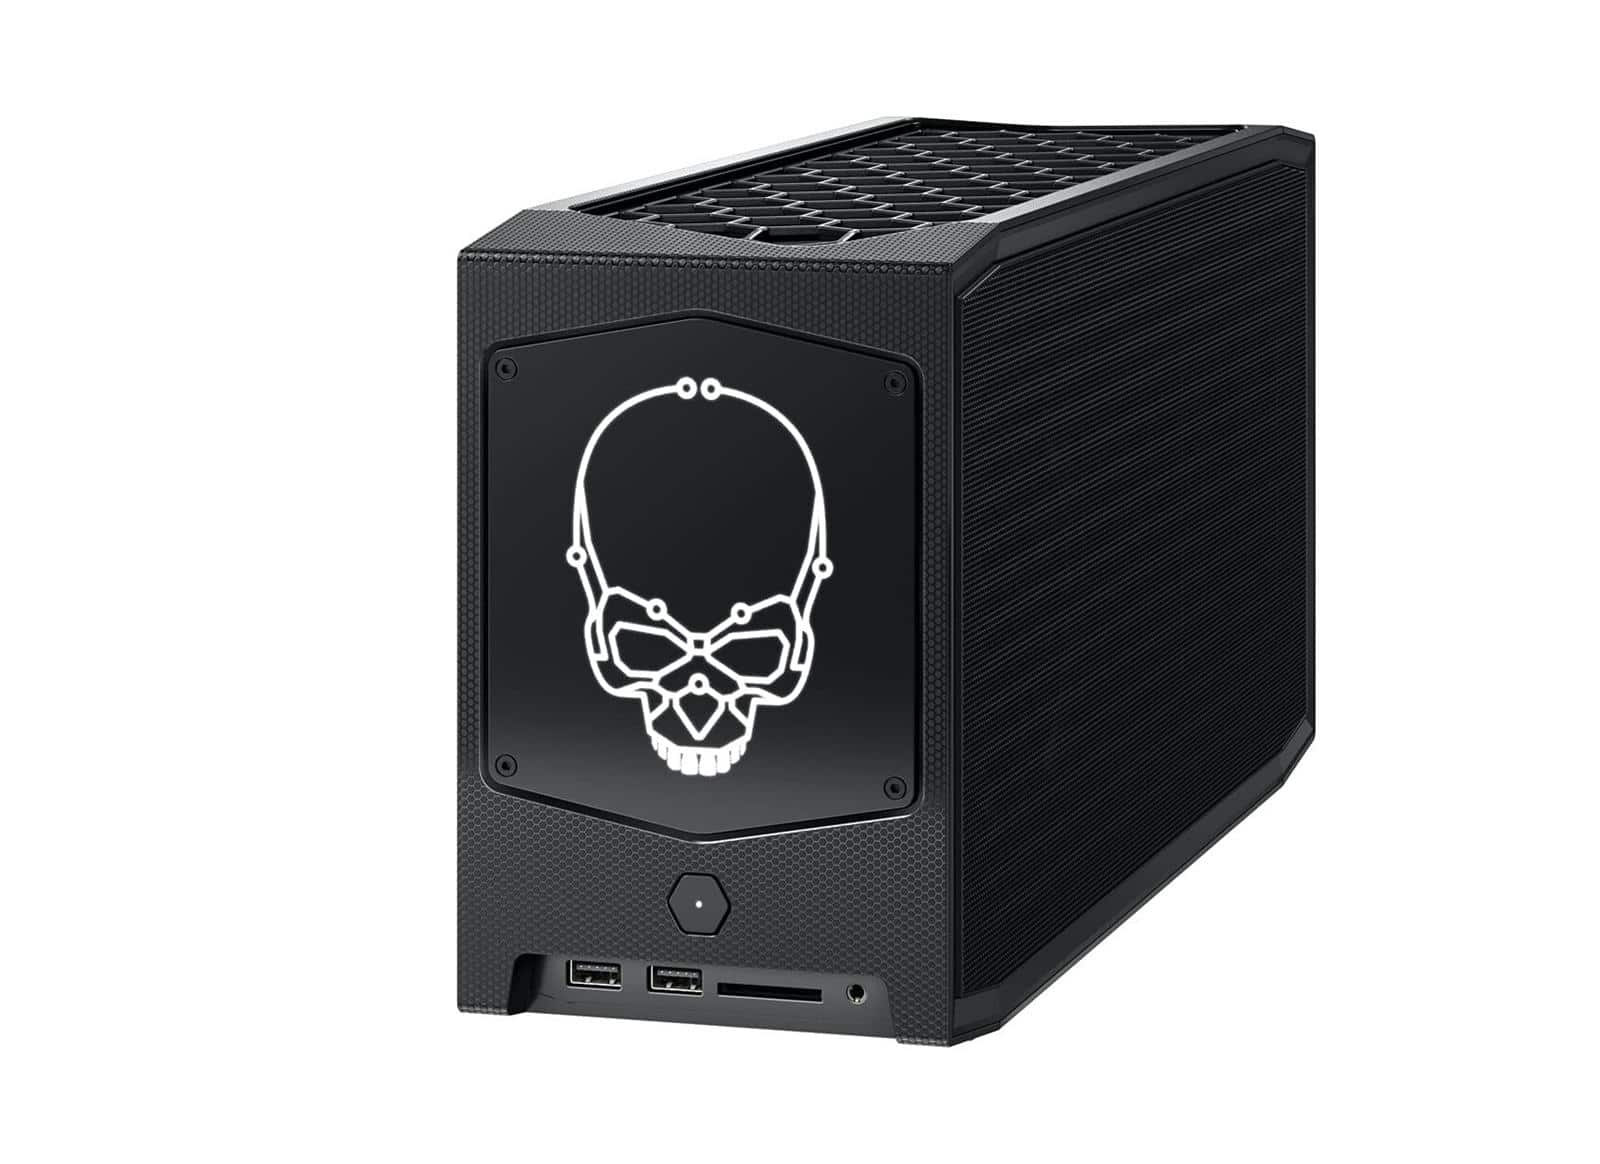 Intel's Beast Canyon NUC barebone version is now available for purchase.  However, there is something wrong with the price